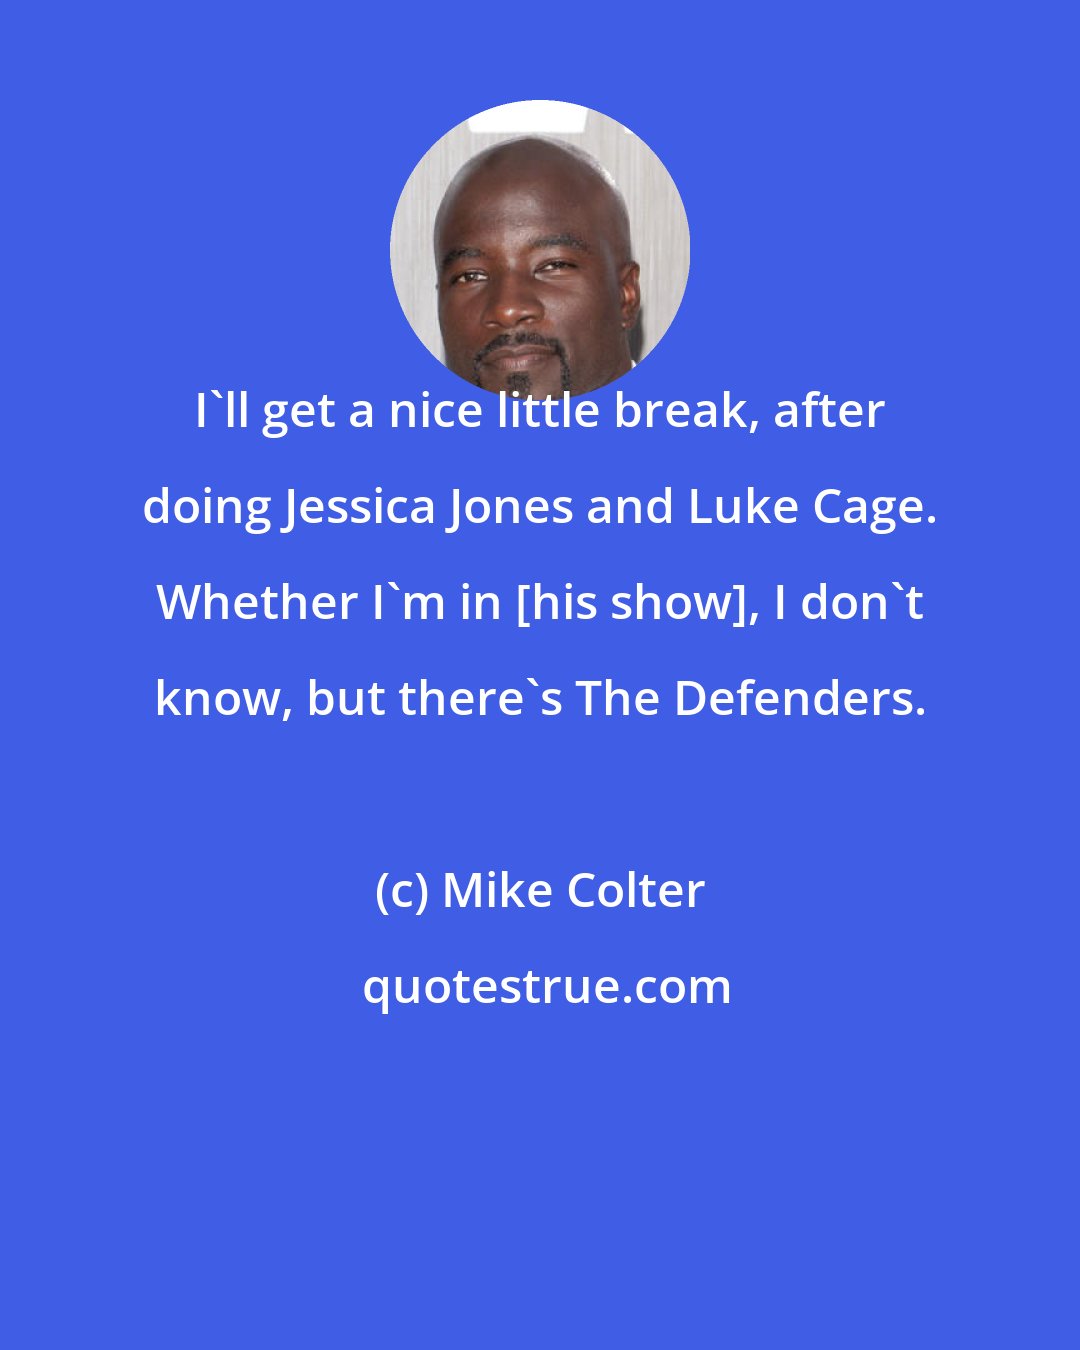 Mike Colter: I'll get a nice little break, after doing Jessica Jones and Luke Cage. Whether I'm in [his show], I don't know, but there's The Defenders.